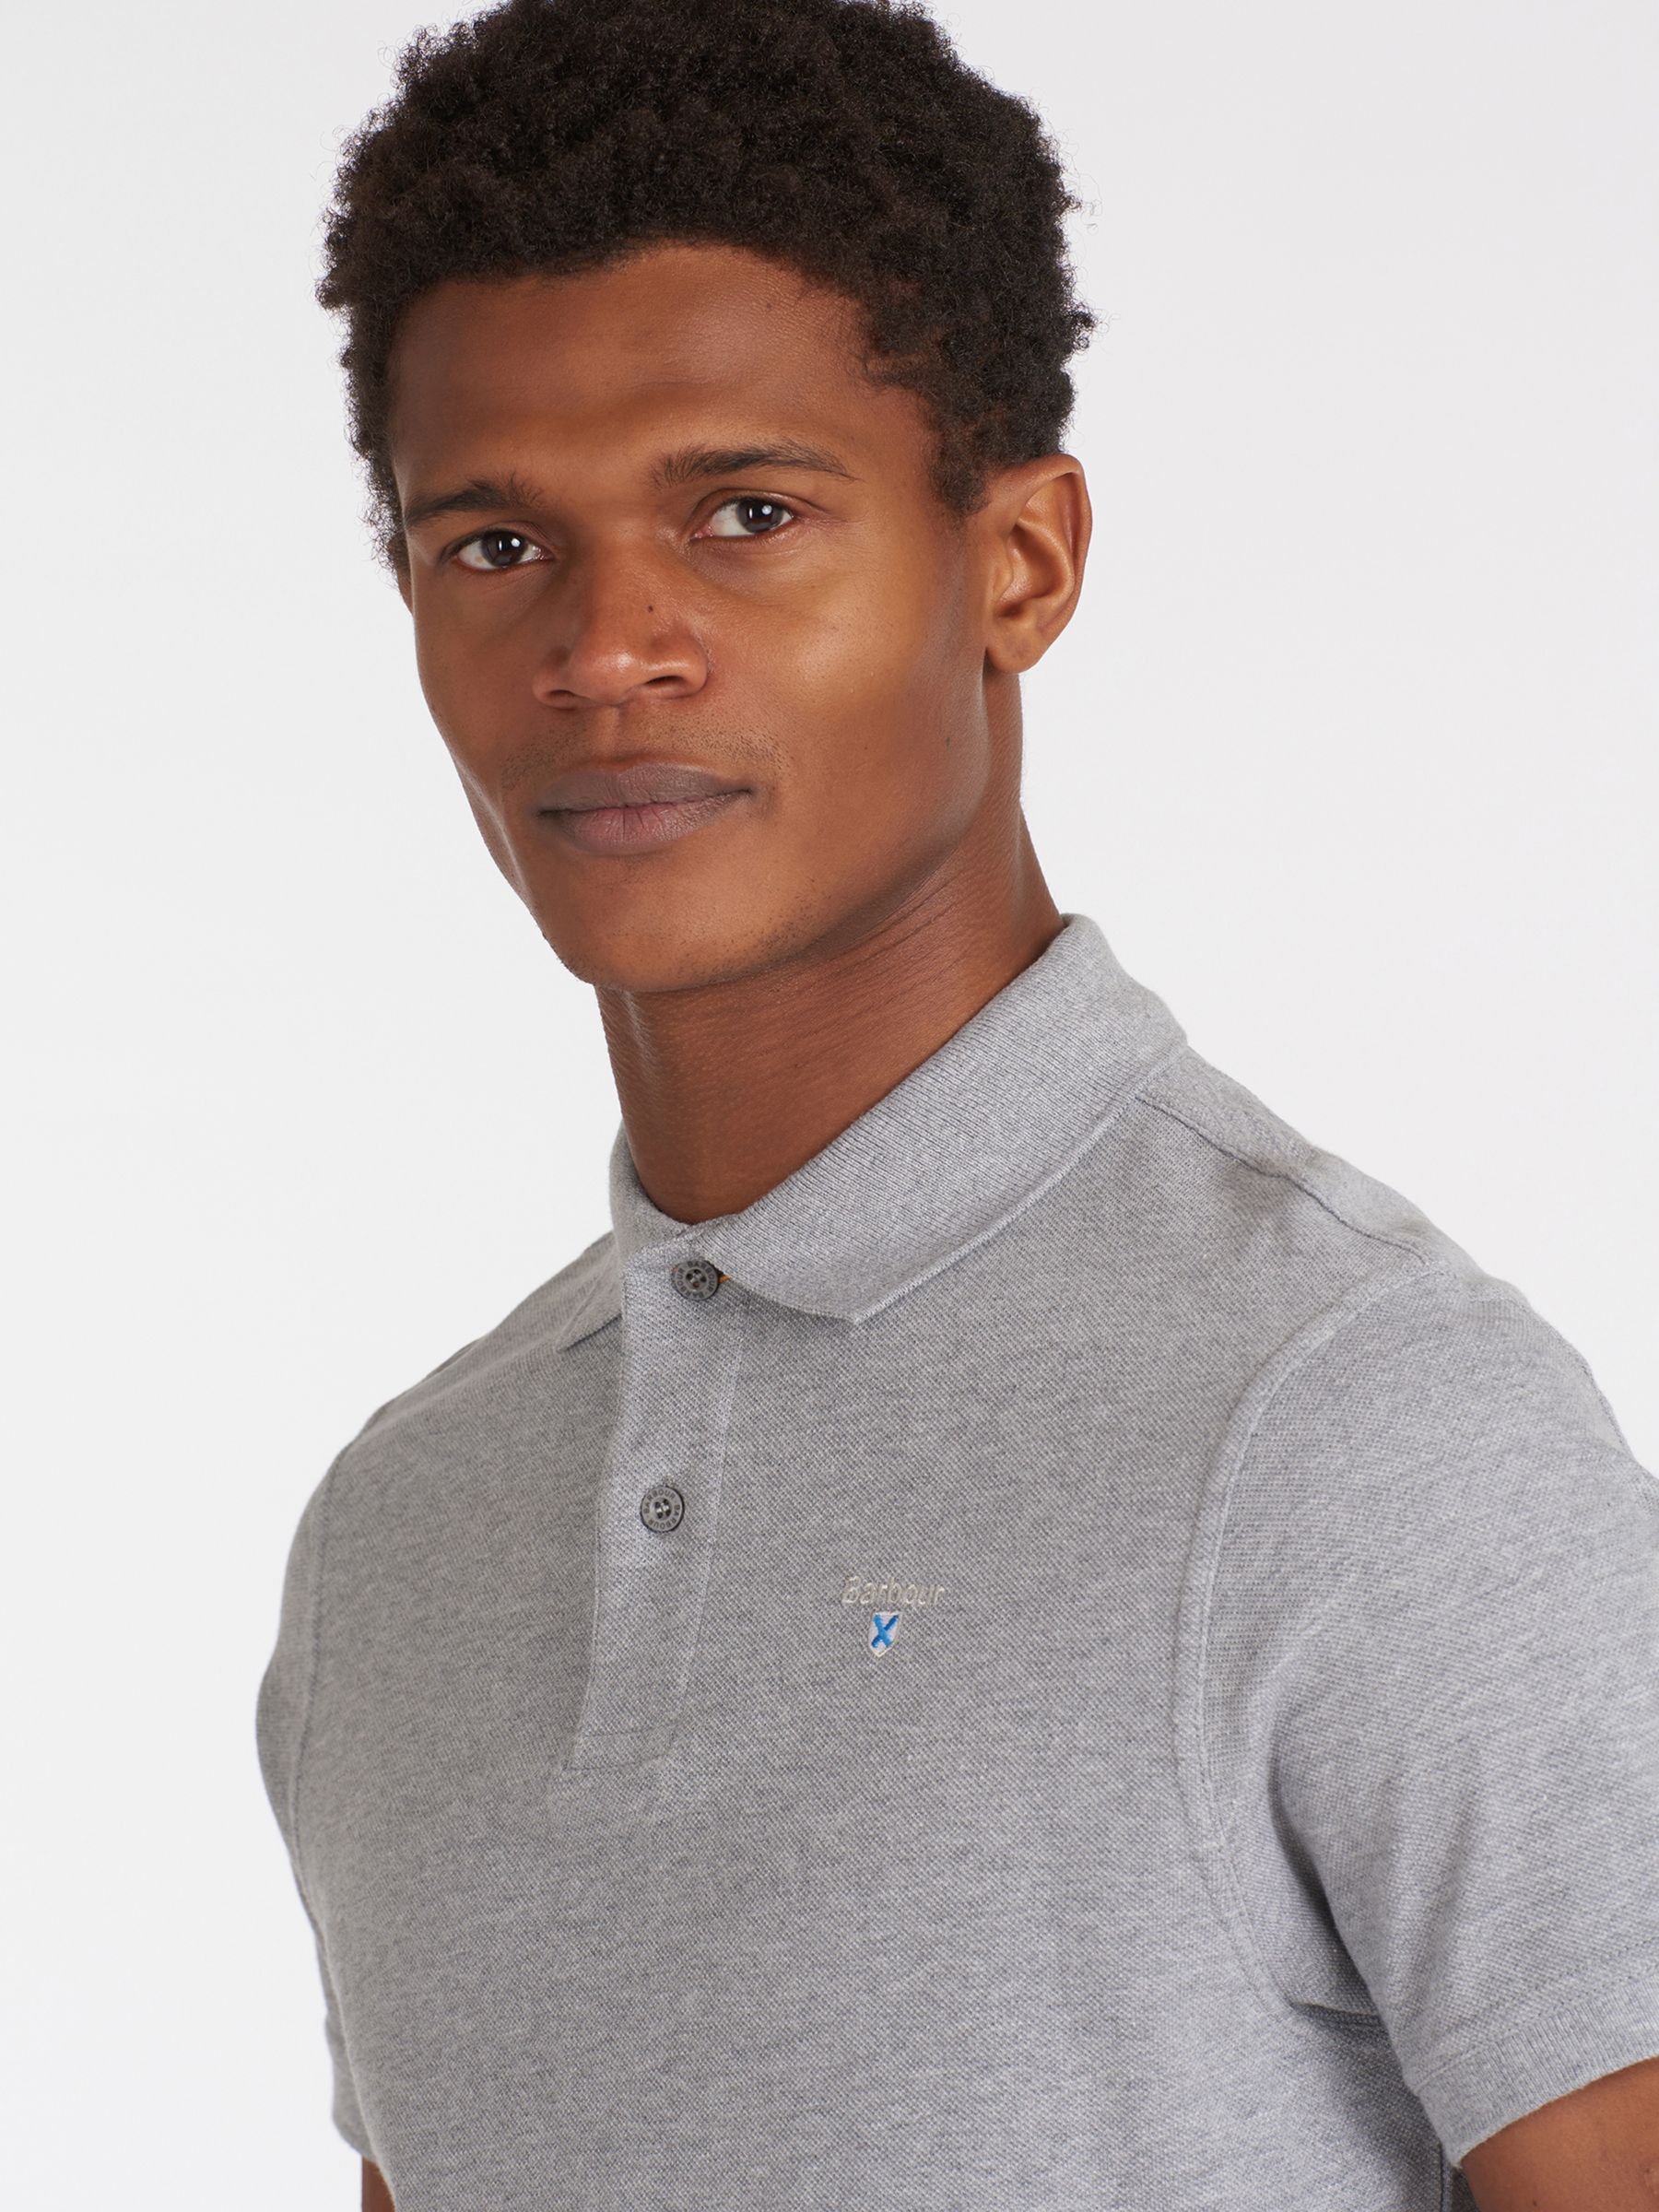 Barbour Short Sleeve Sports Polo Shirt, Grey Marl, S